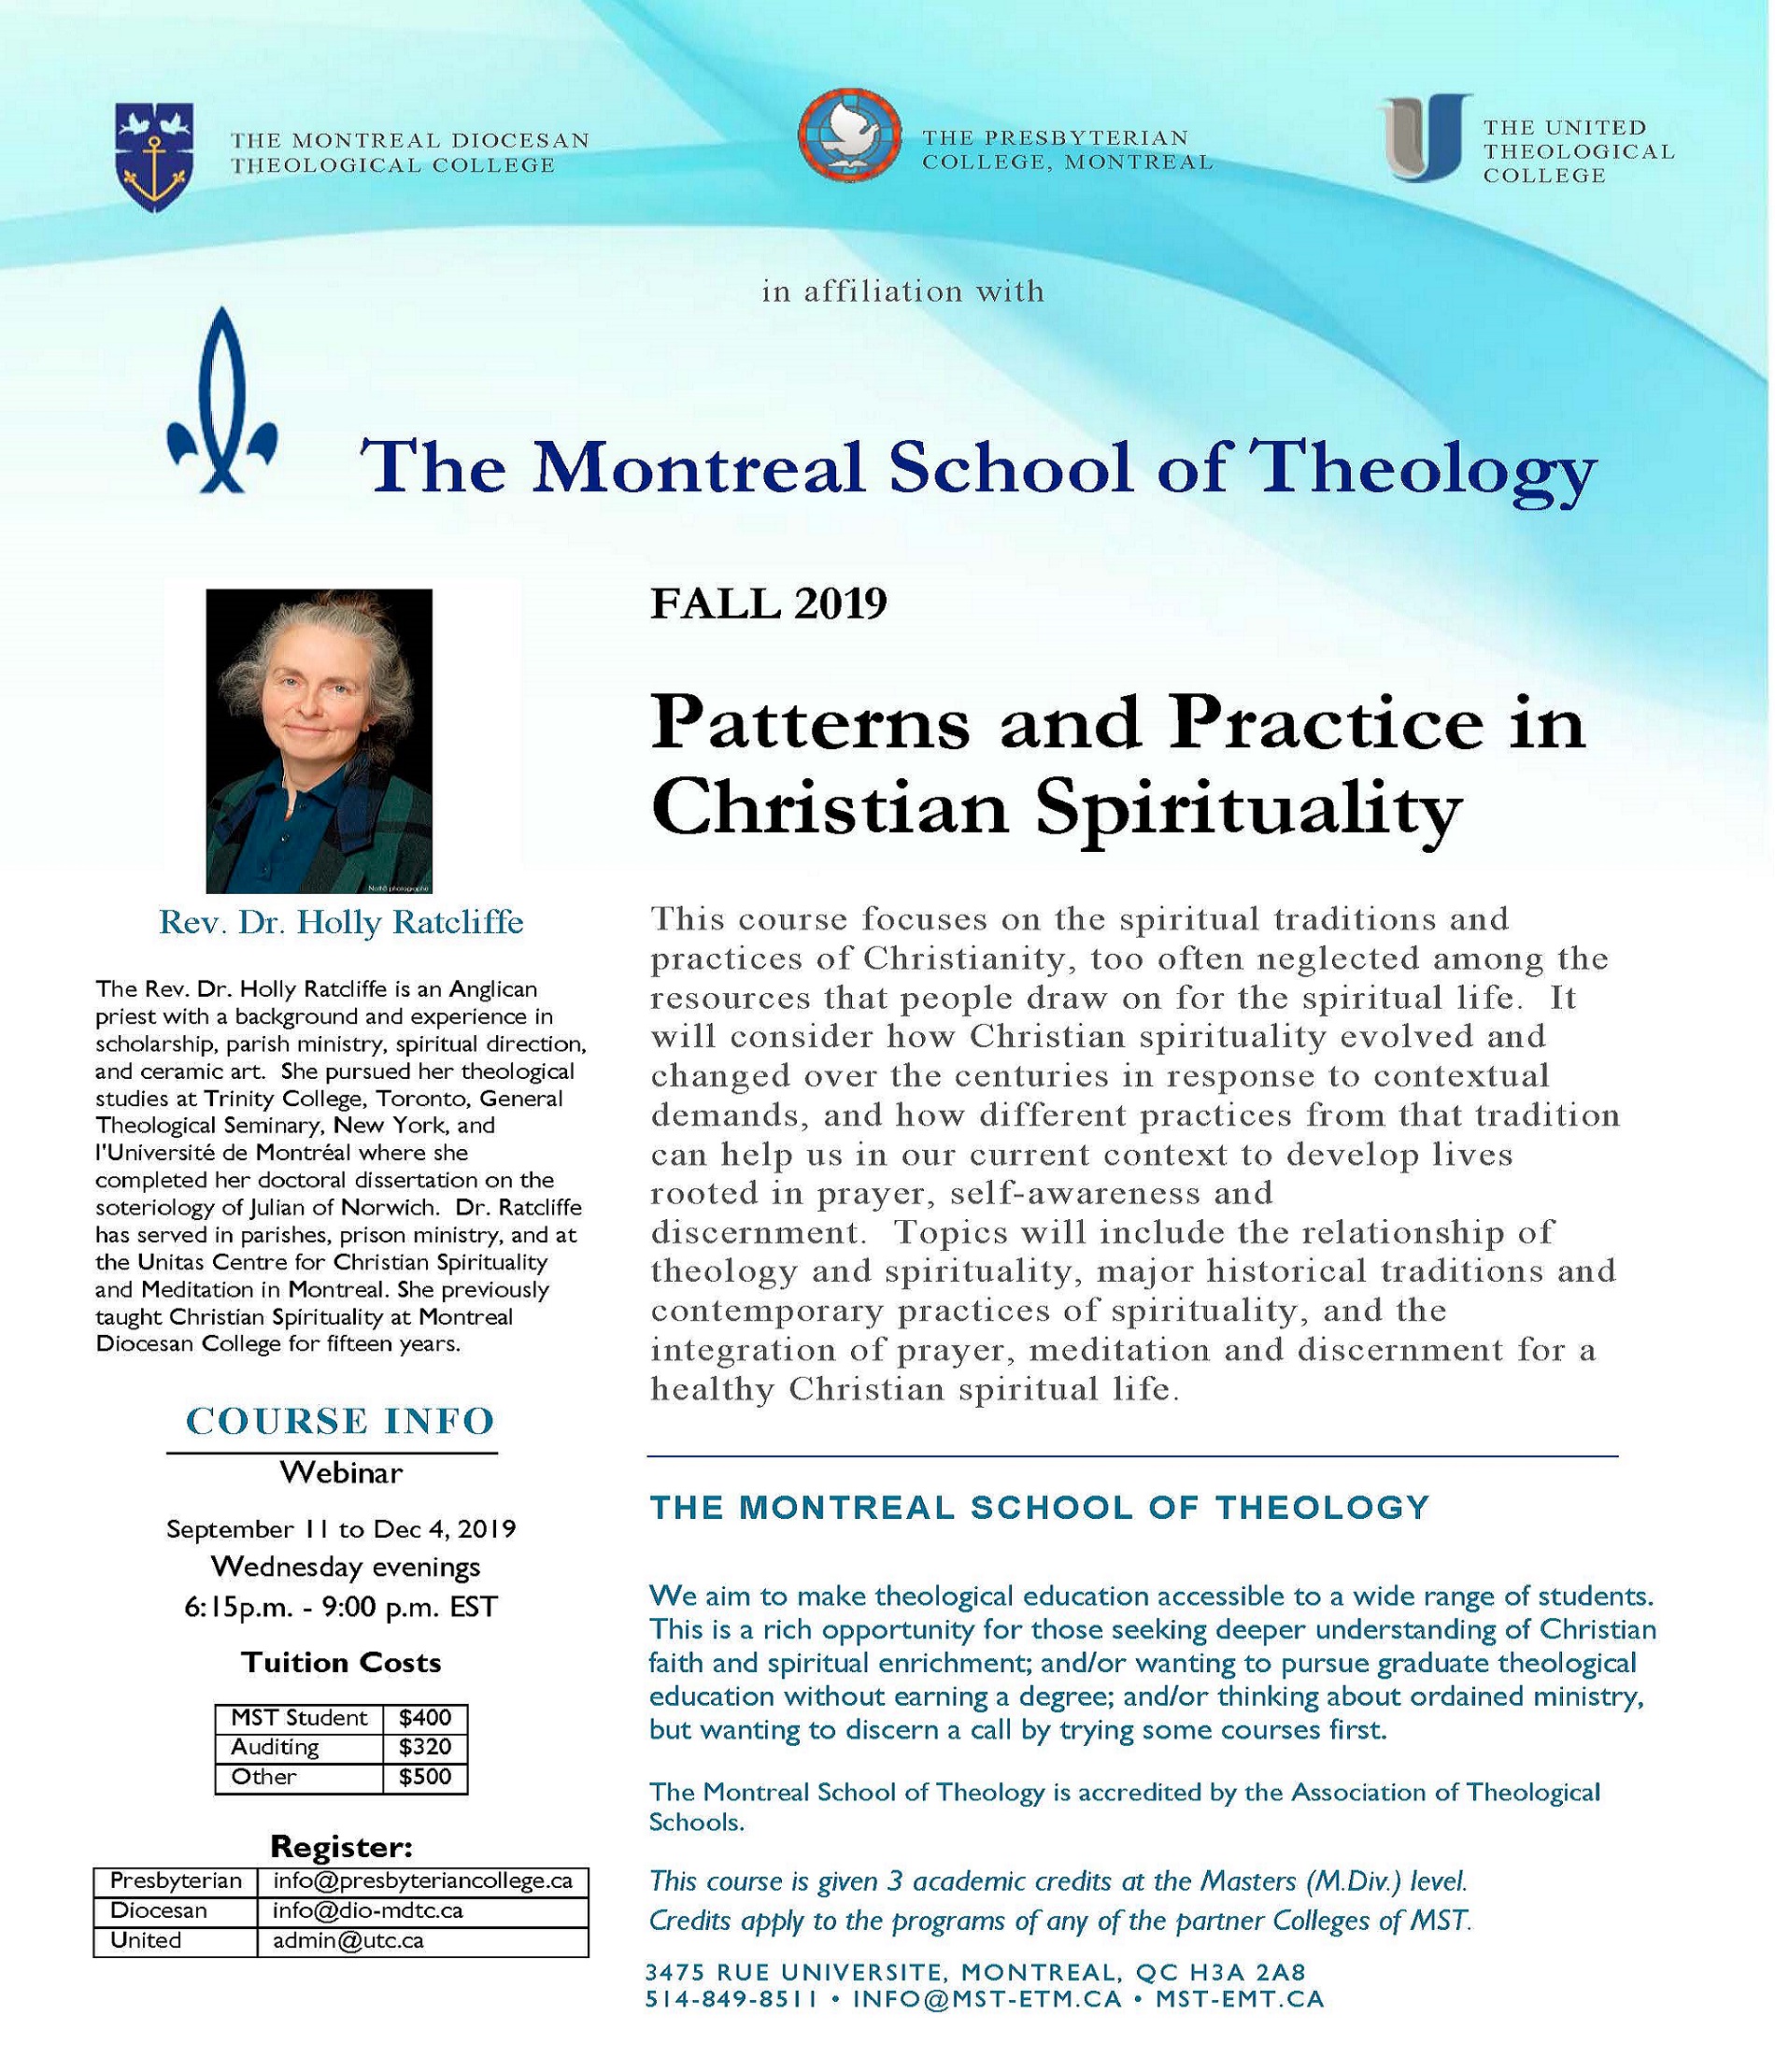 Fall 2019: Patterns and Practice in Christian Spirituality